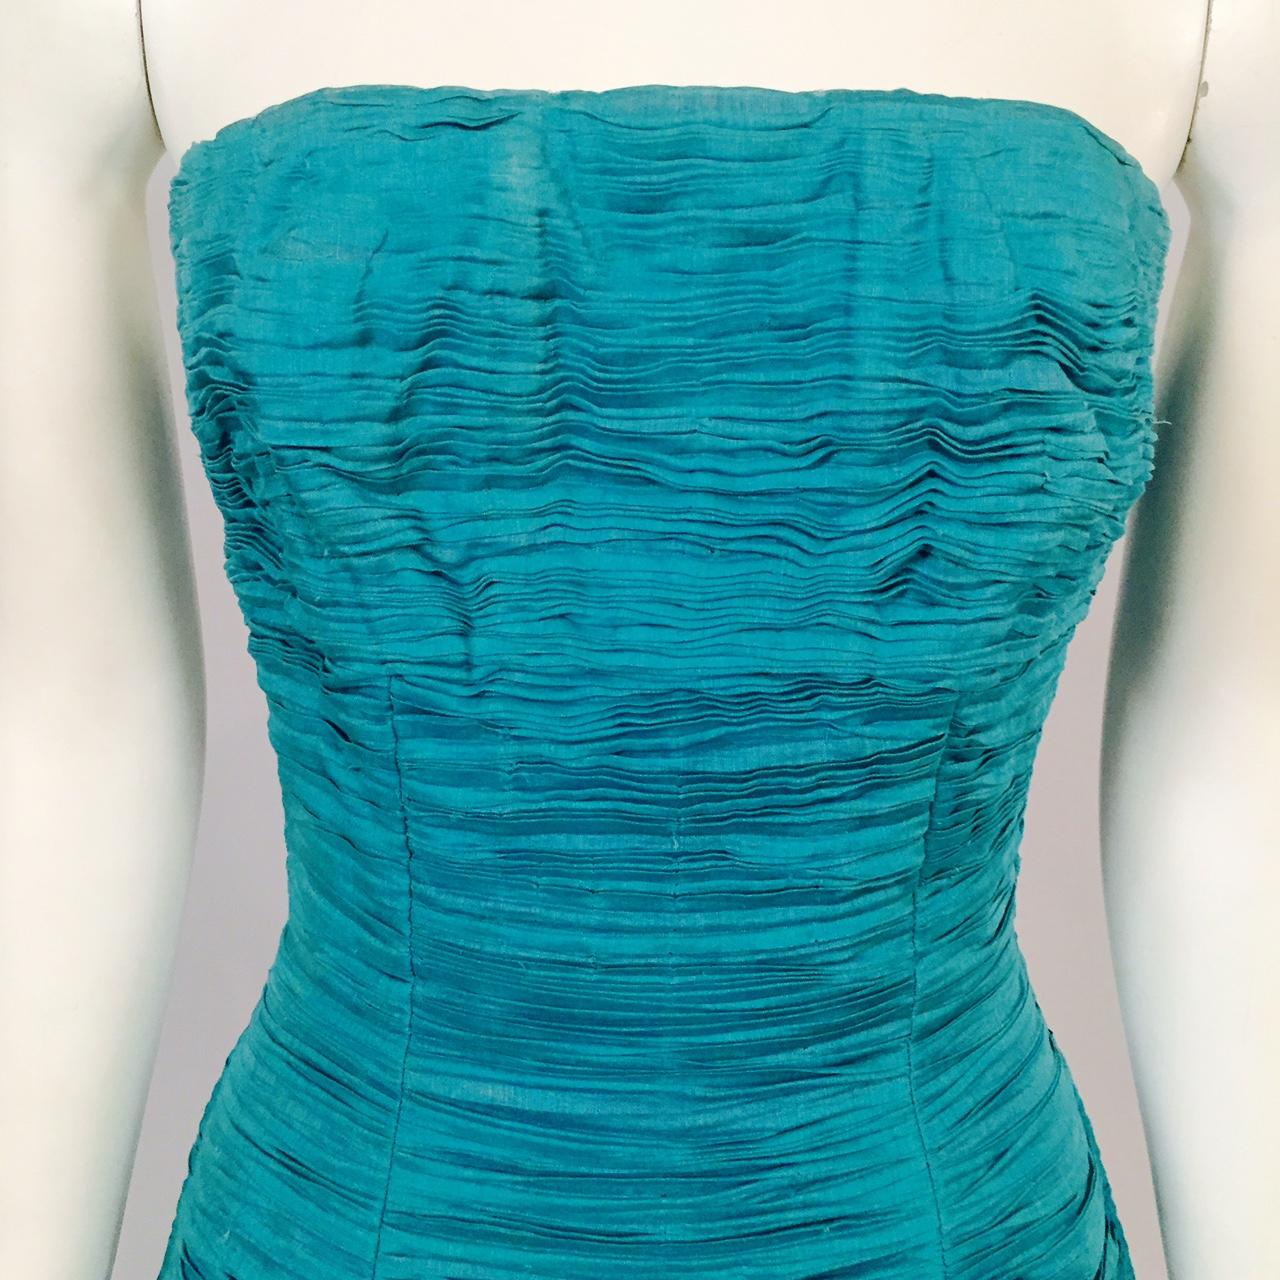 Sybil Connolly, the Irish Couturier,  is most famous for her extremely rare pleated linen clothing. Each garment used nine yards of linen to make one yard of pleated linen. This stunning blue/green linen evening gown was designed and made in the